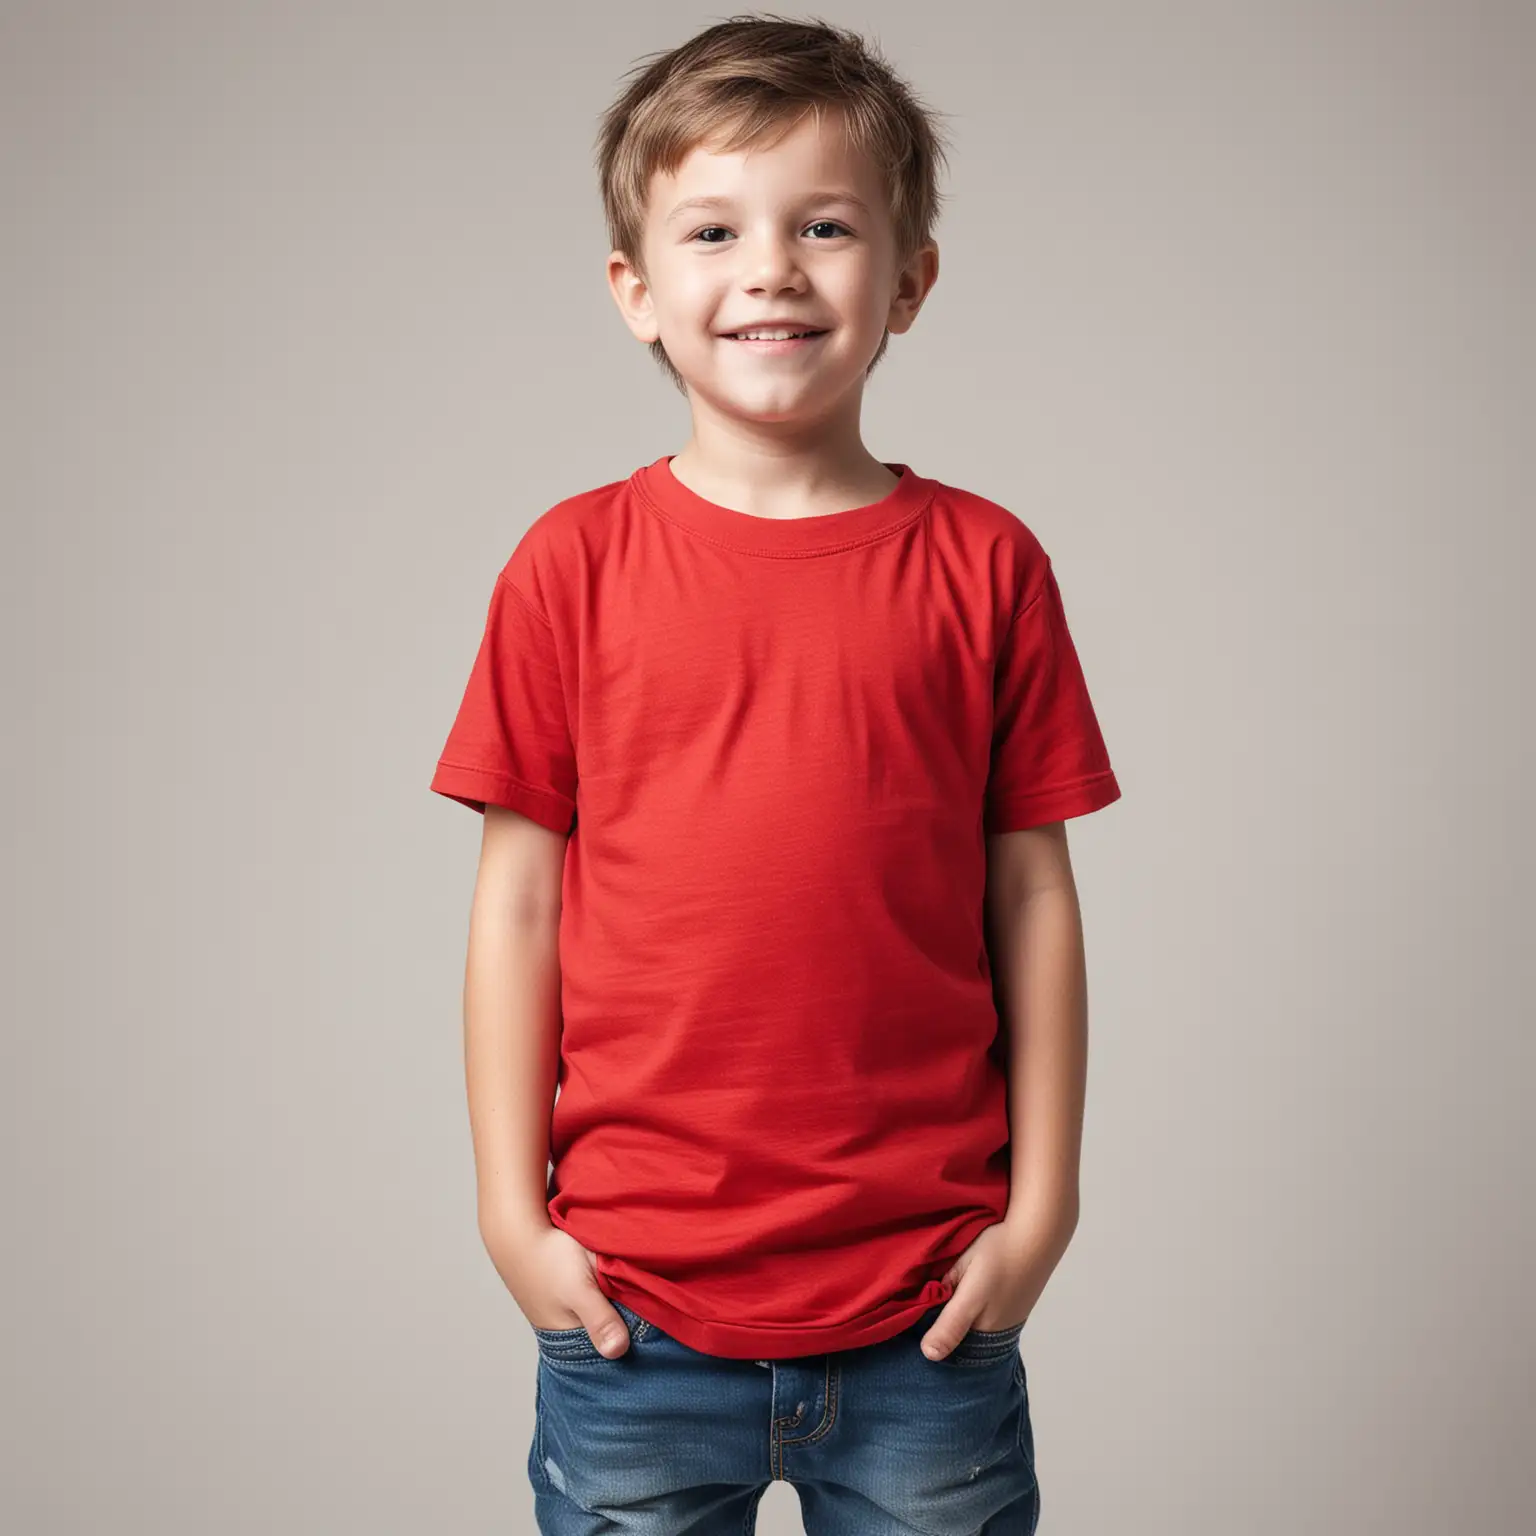 Adorable Caucasian Child in Red TShirt on Clean White Background